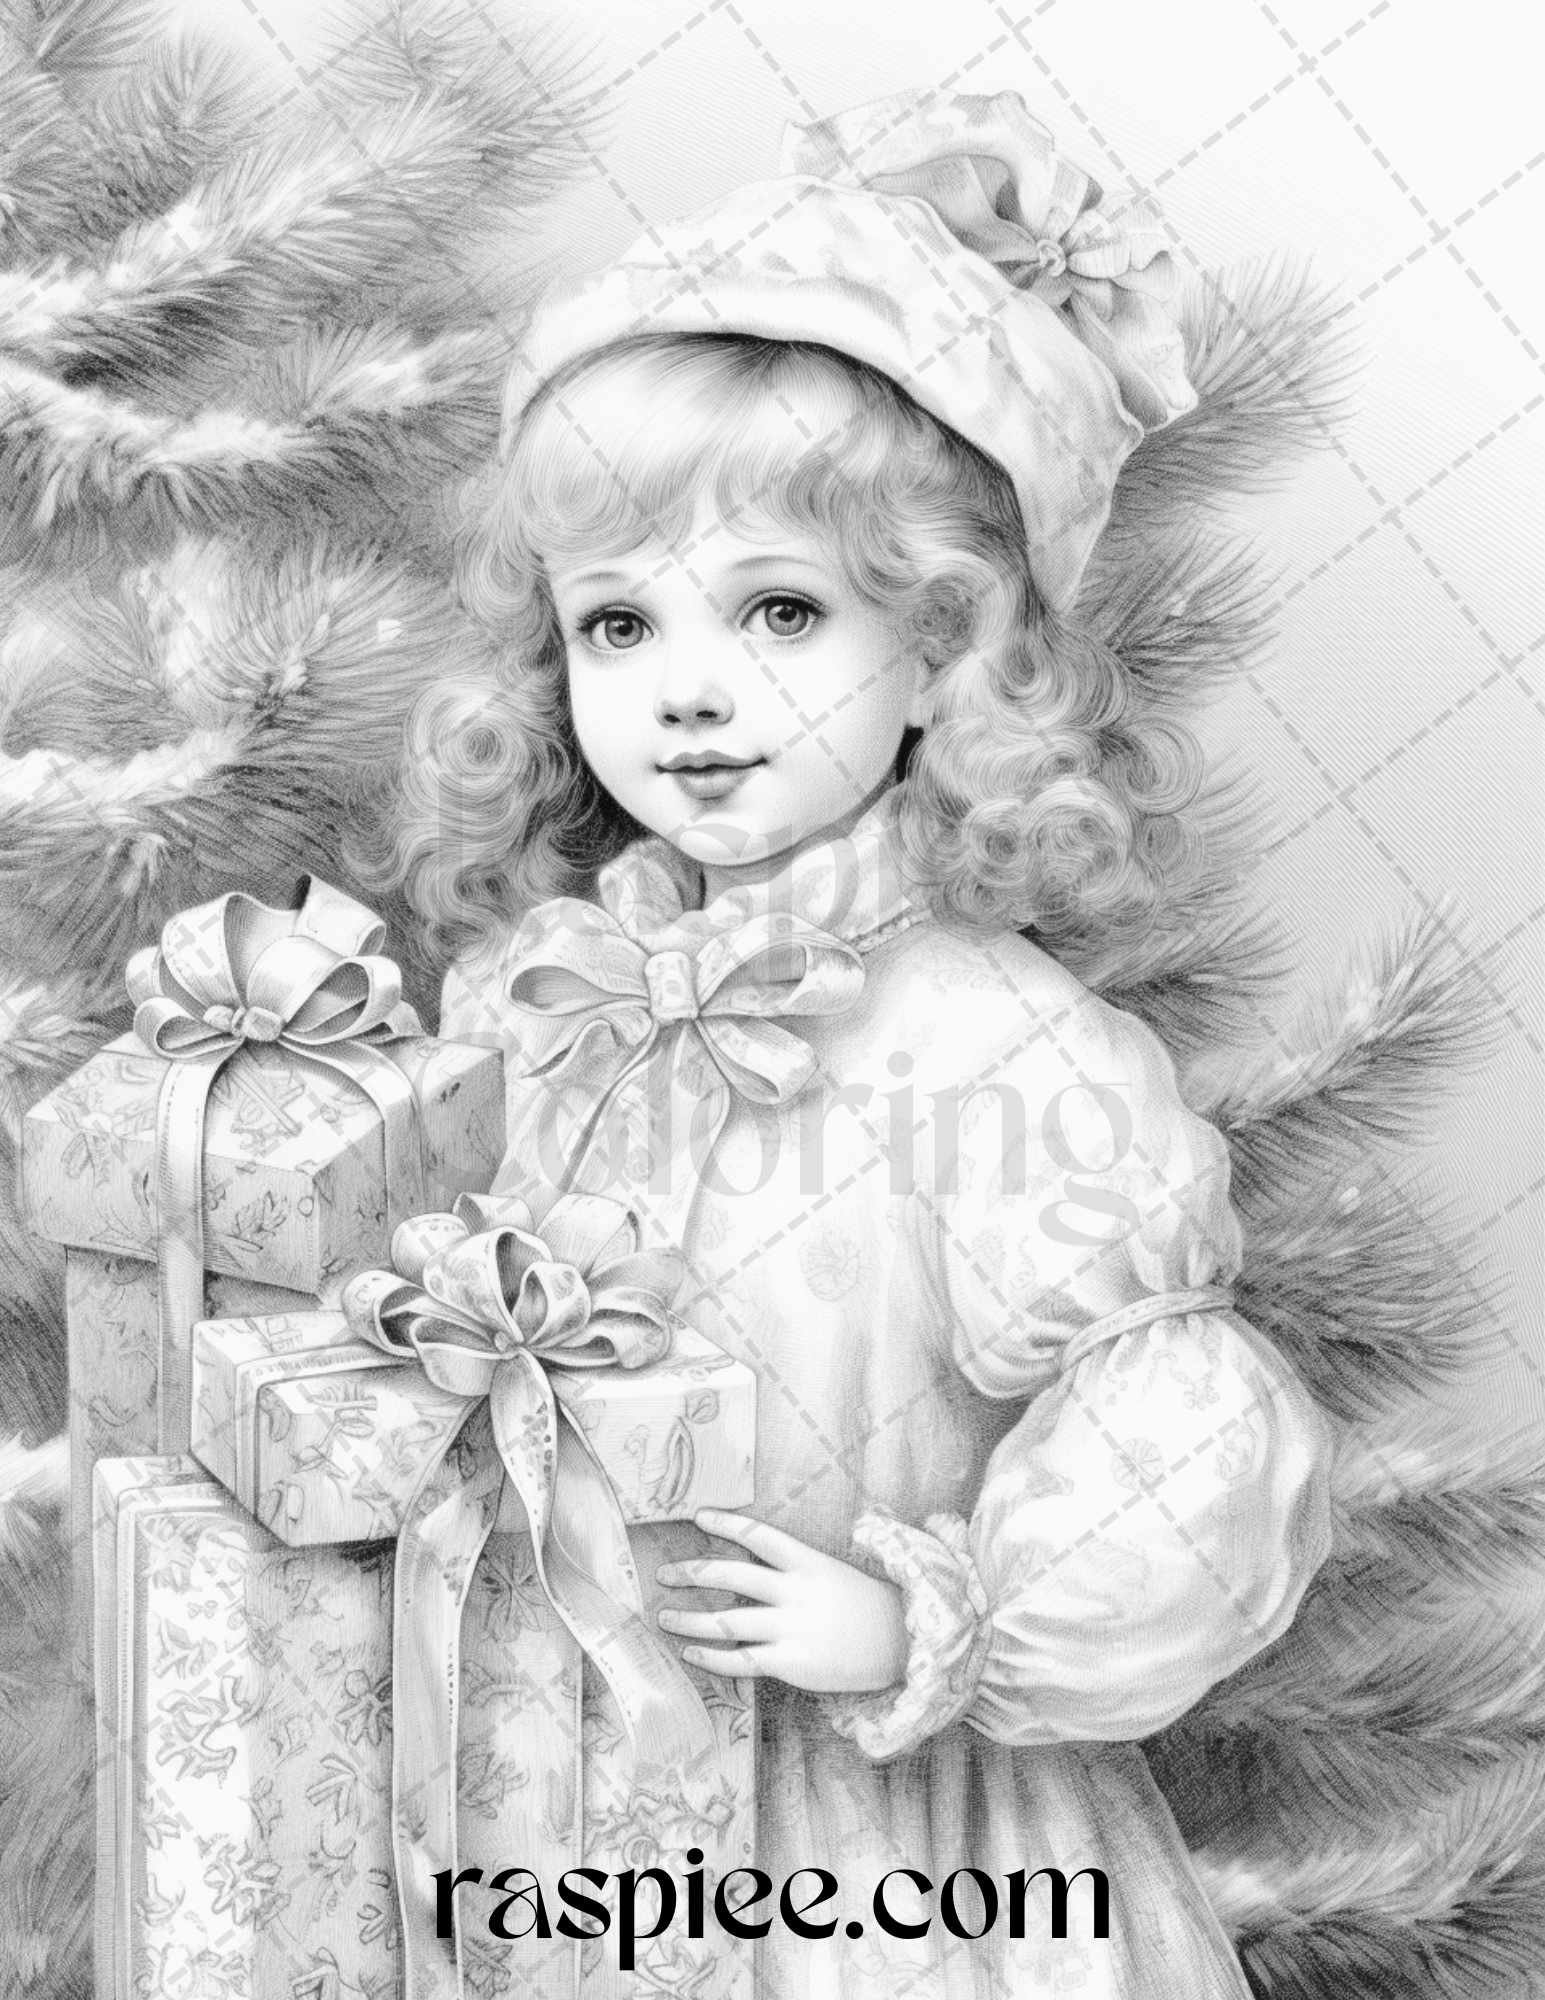 Vintage Christmas Girls Coloring Pages, Printable Adult Grayscale Coloring Sheets, Retro Holiday Illustrations for Coloring, Christmas Coloring Book for Adults, Nostalgic Holiday Coloring Activities, xmas coloring pages printable